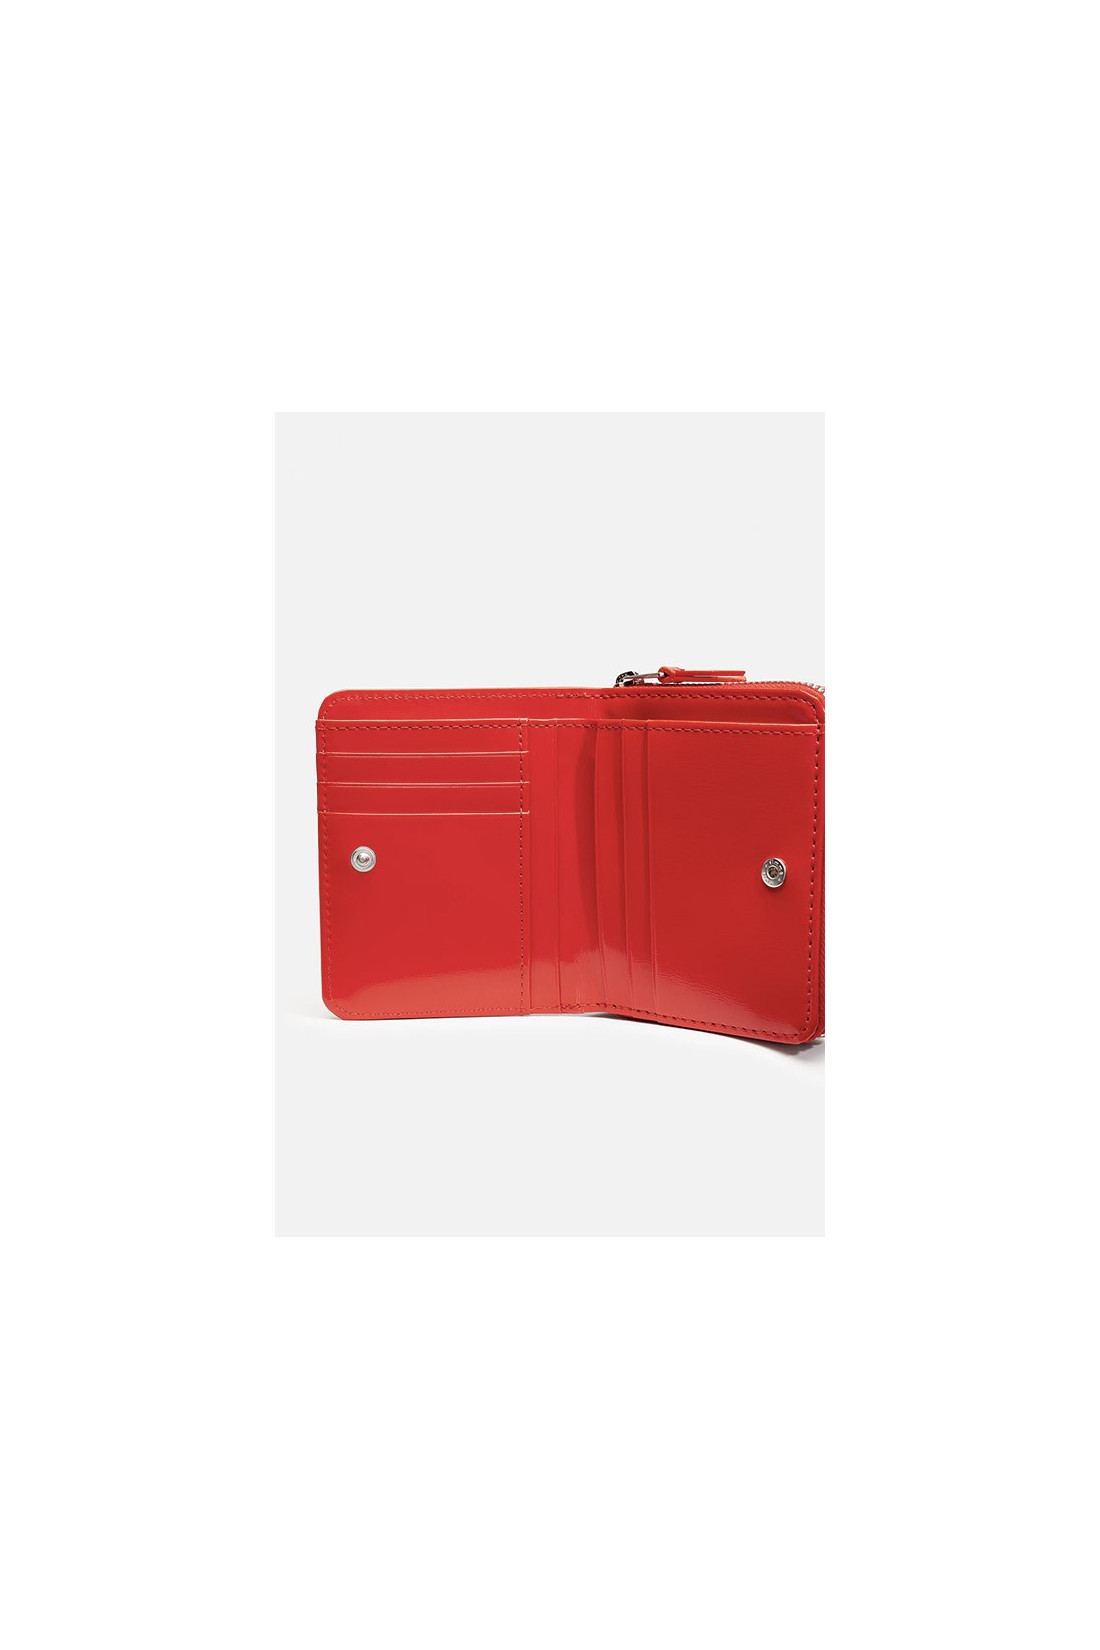 AMI / Compact wallet Red